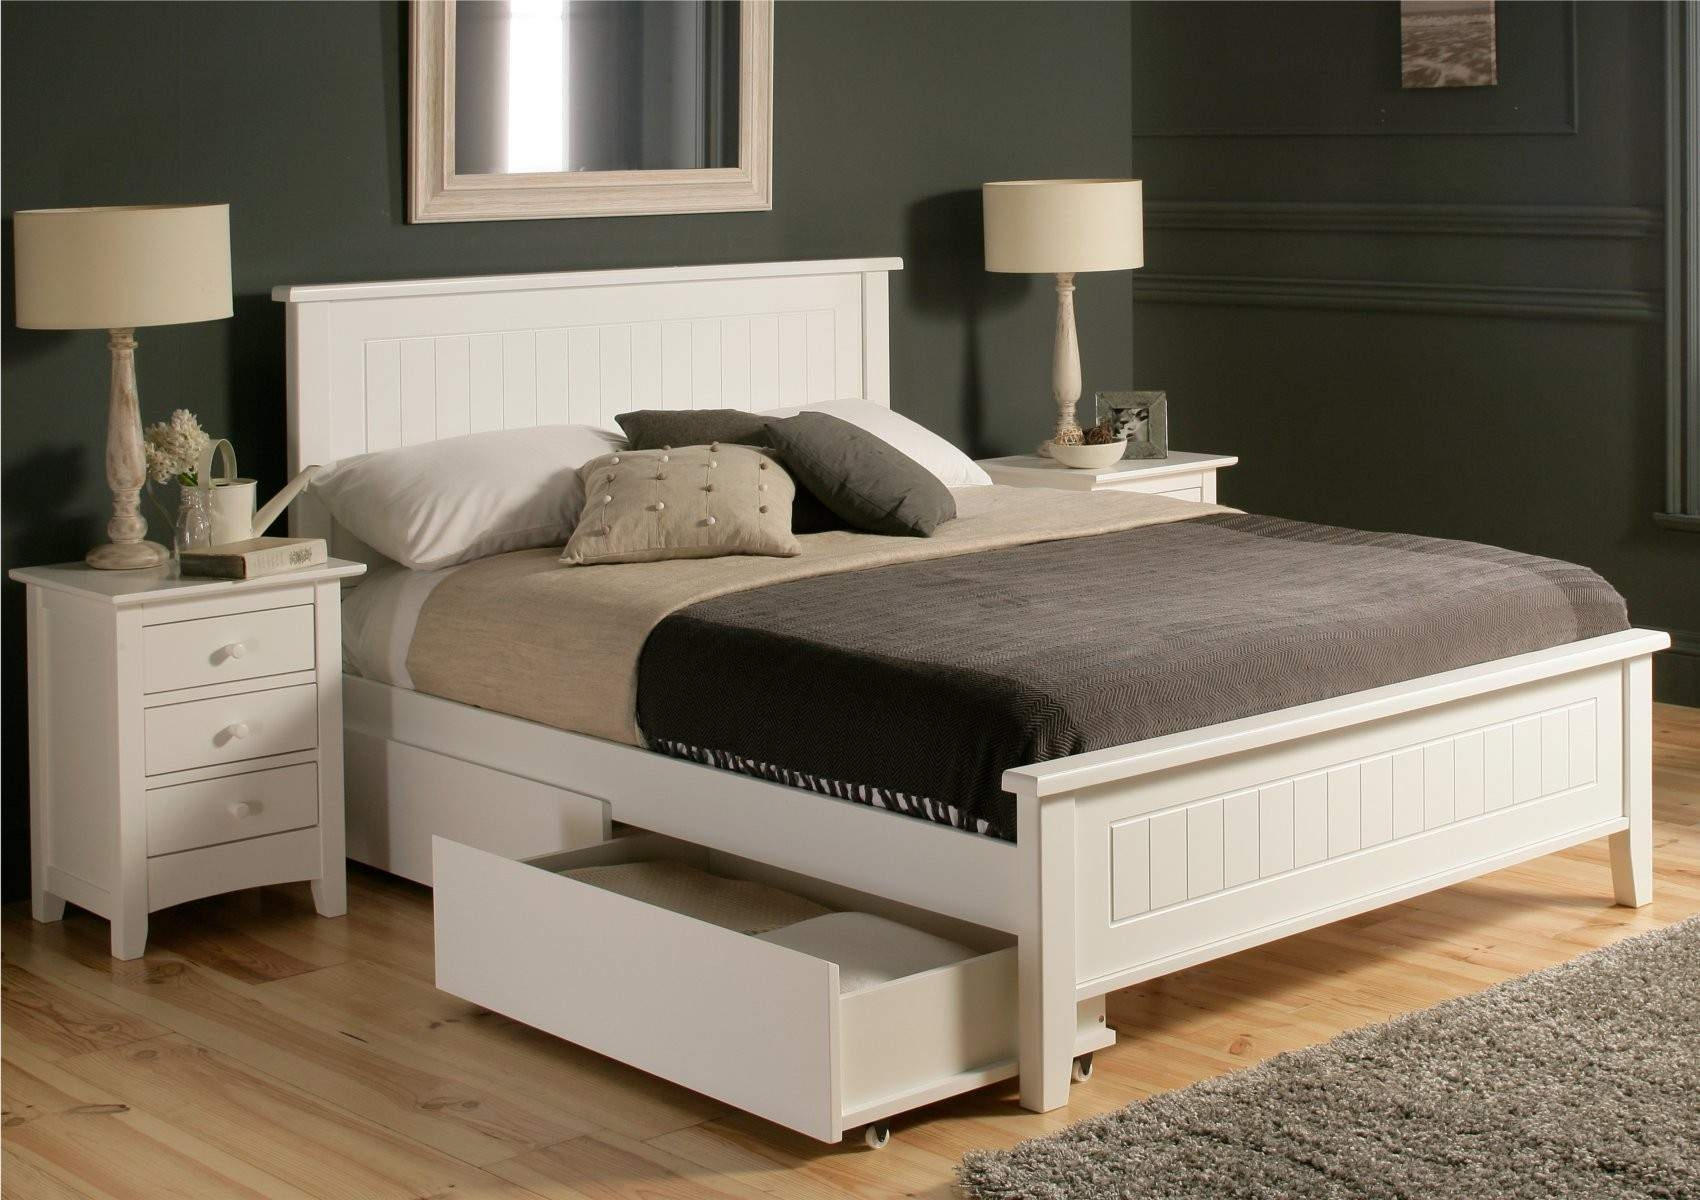 queen size bed frame with drawers underneath approved queen bed frames with storage size frame drawers underneath TYDFBHN